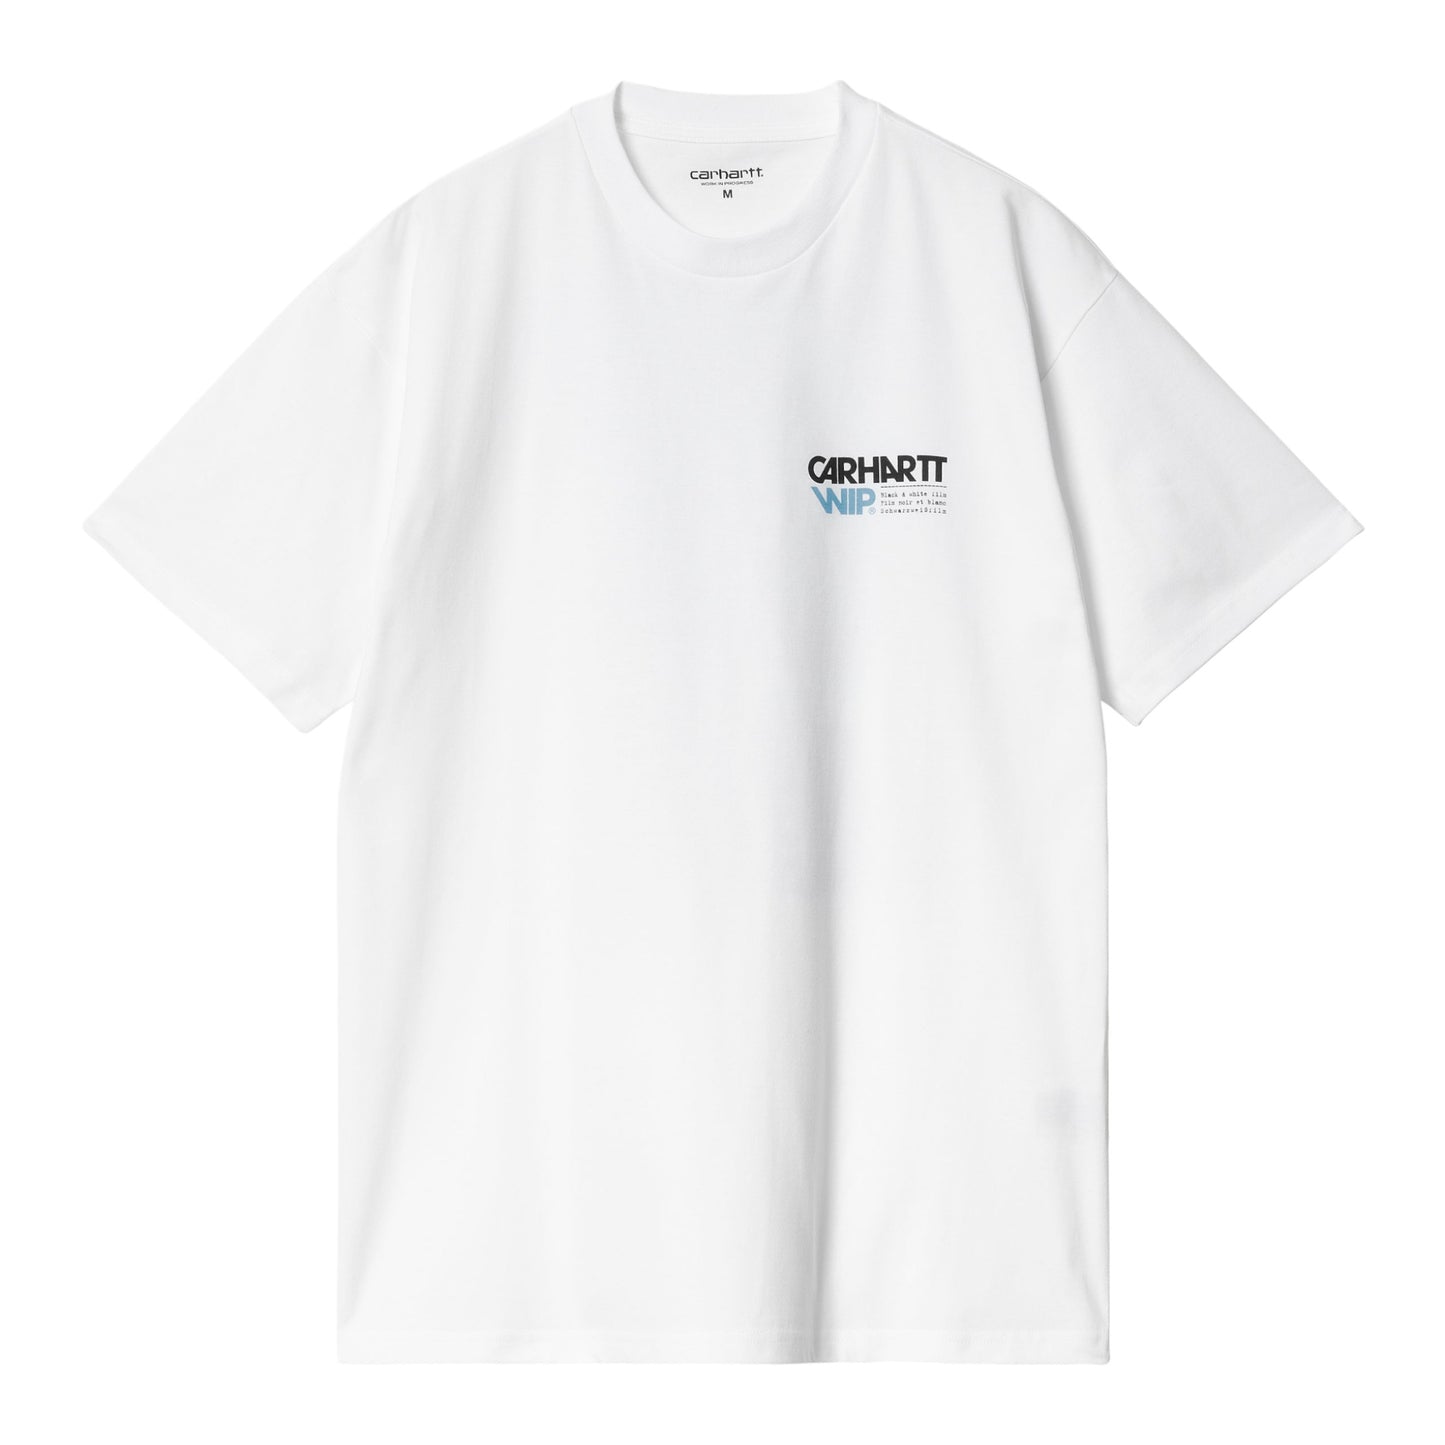 Carhartt Wip S/S Contact Sheet T-Shirt - White - Francis Concept